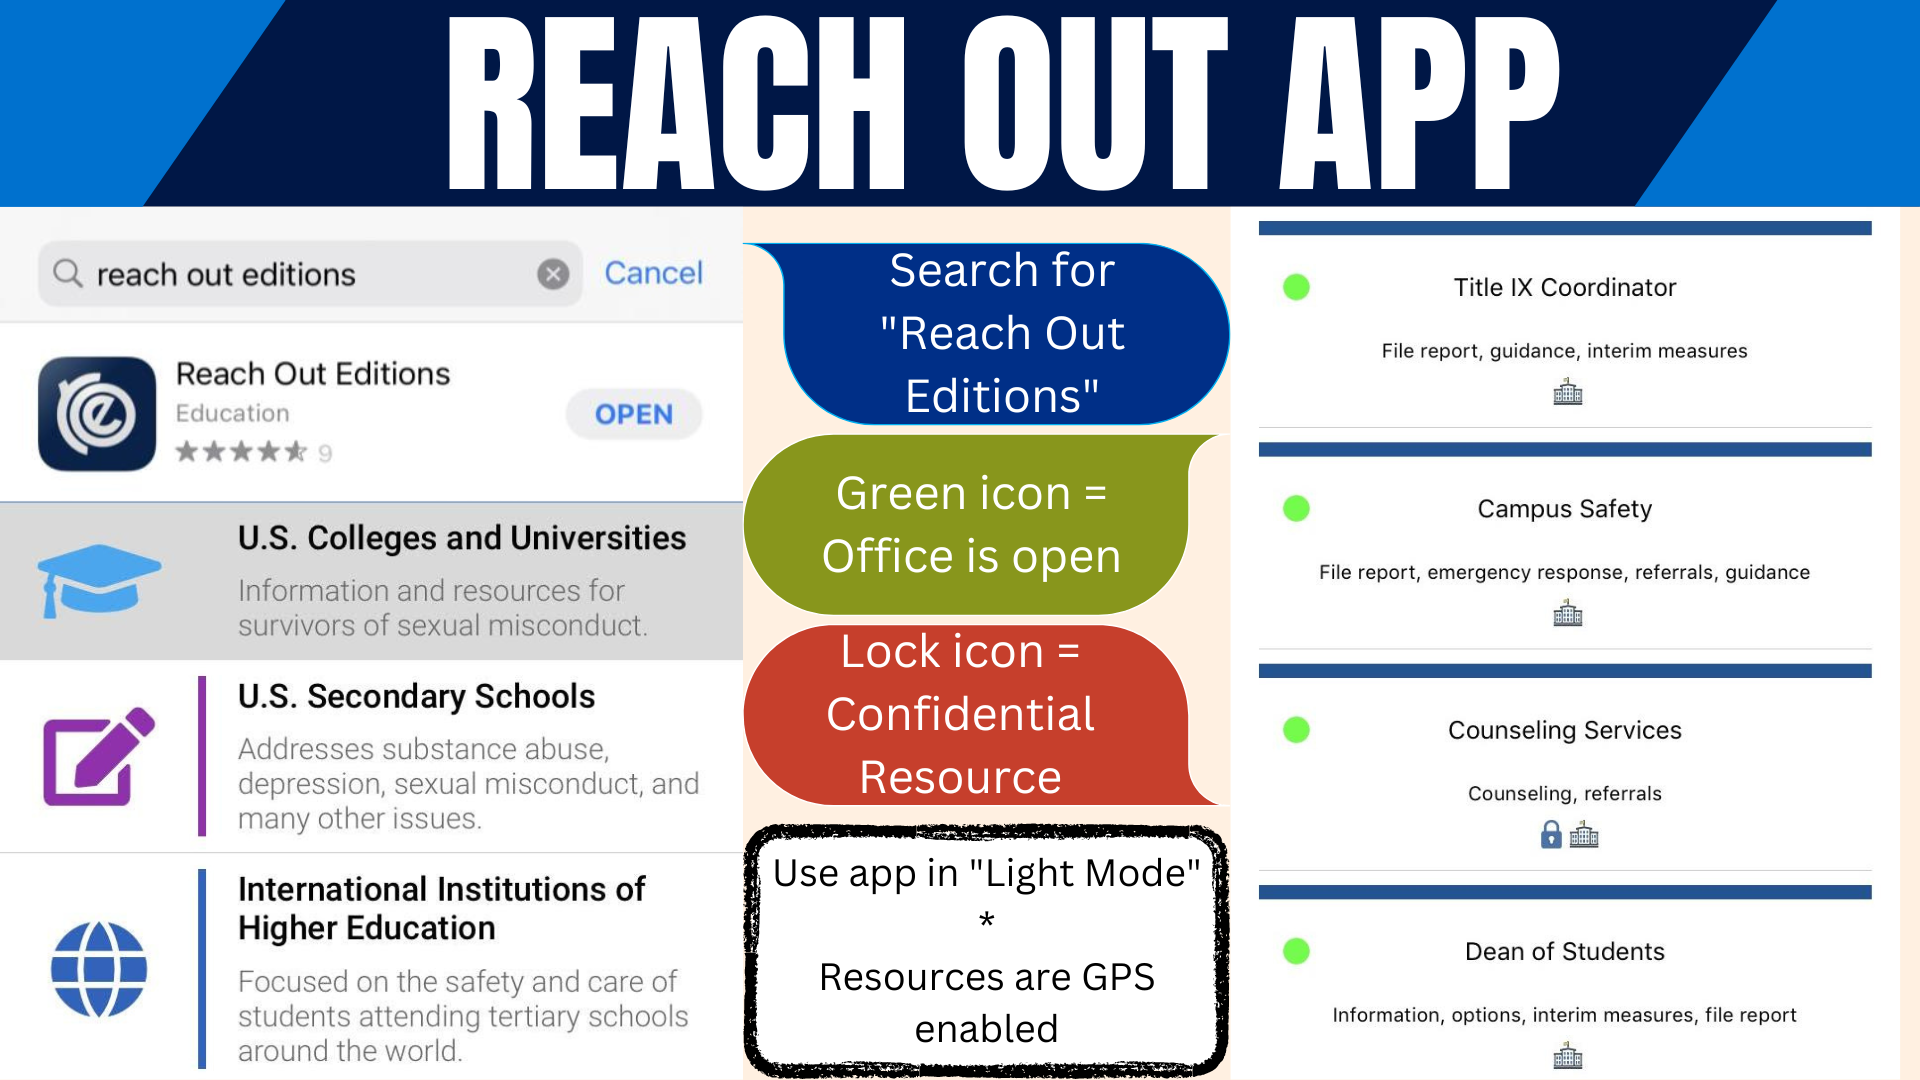 Reach Out App Information